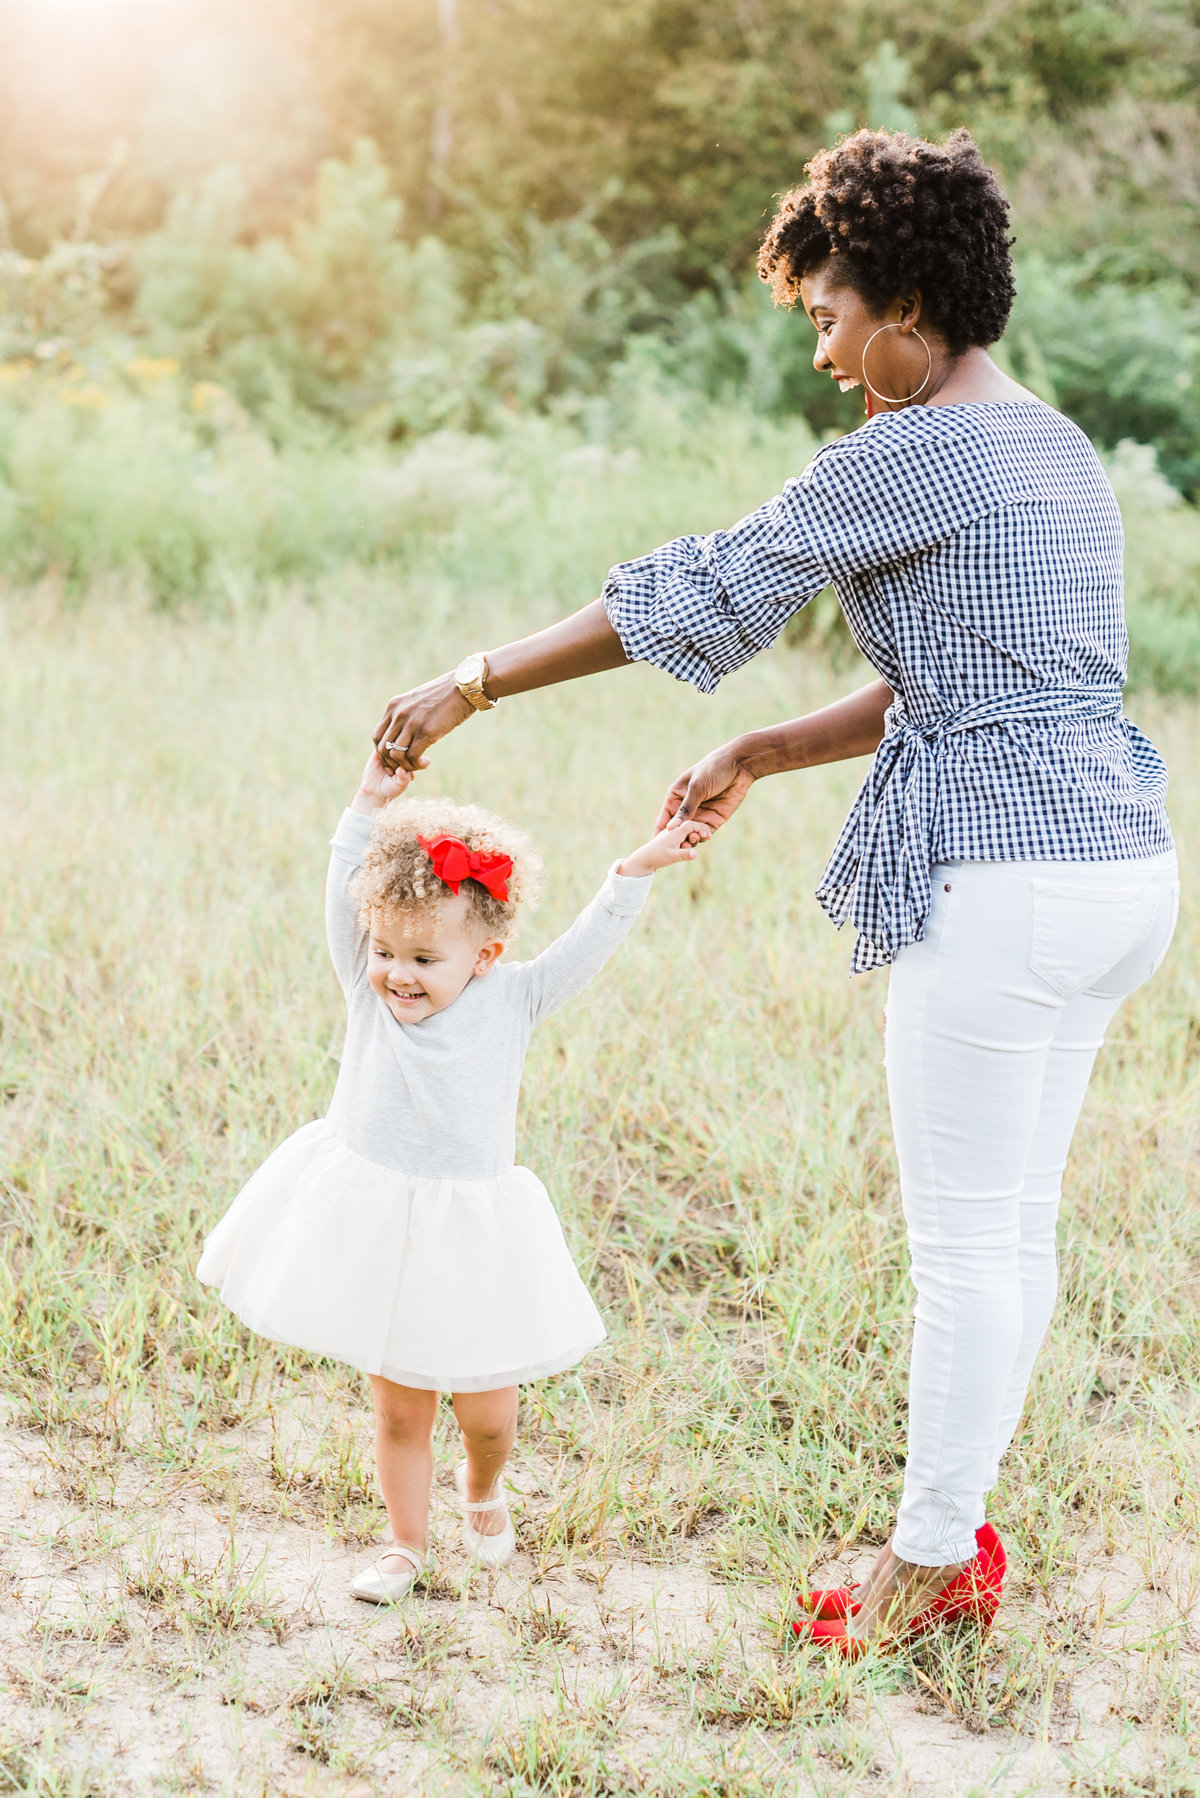 Mom twirls her daughter in a field during a family session in Raleigh NC. Photographed by Raleigh family photographer A.J. Dunlap Photography.